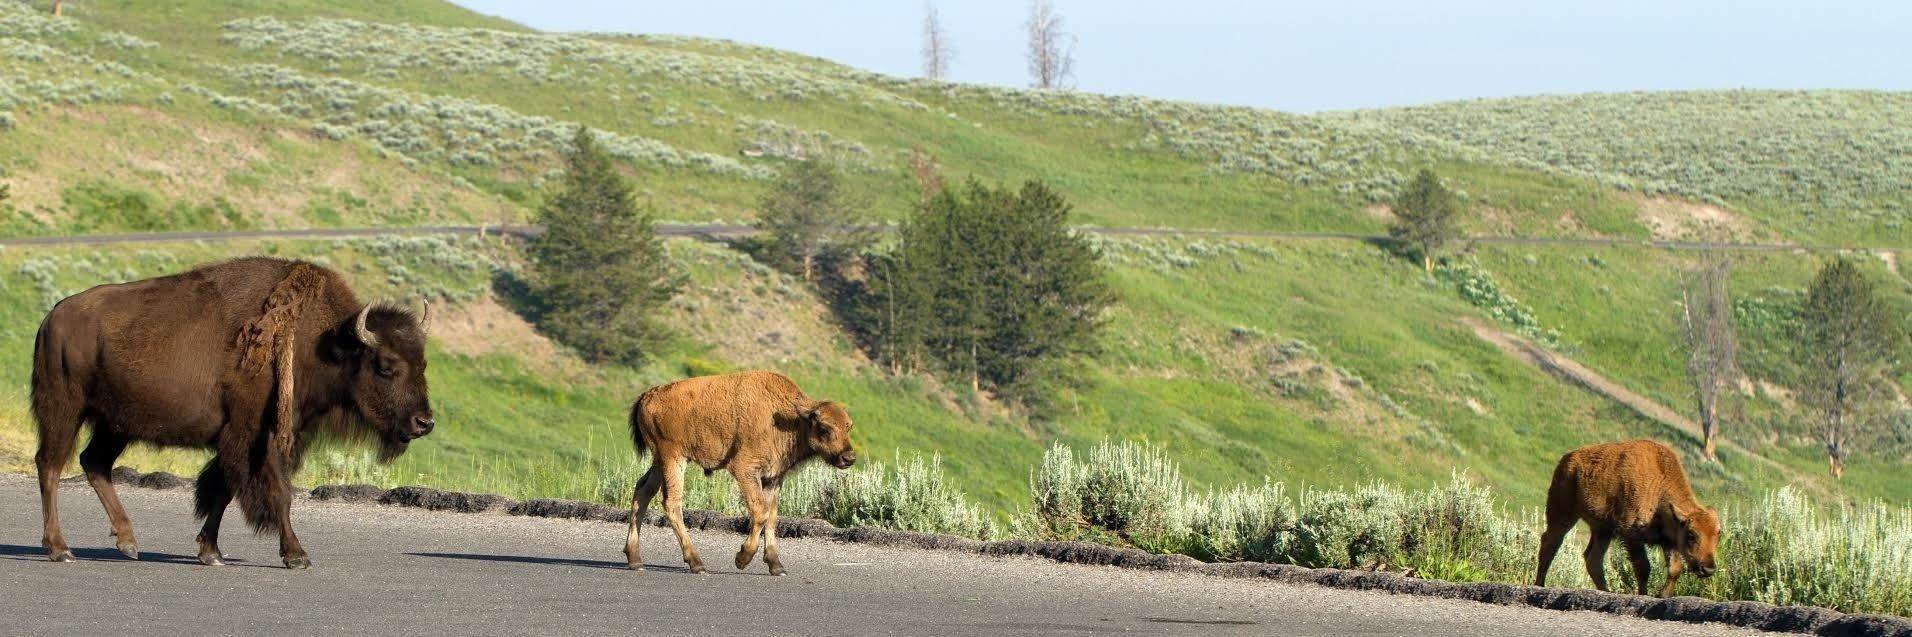 Yellowstone tourists ticketed for putting bison calf in vehicle. ©Martha Marks/Shutterstock